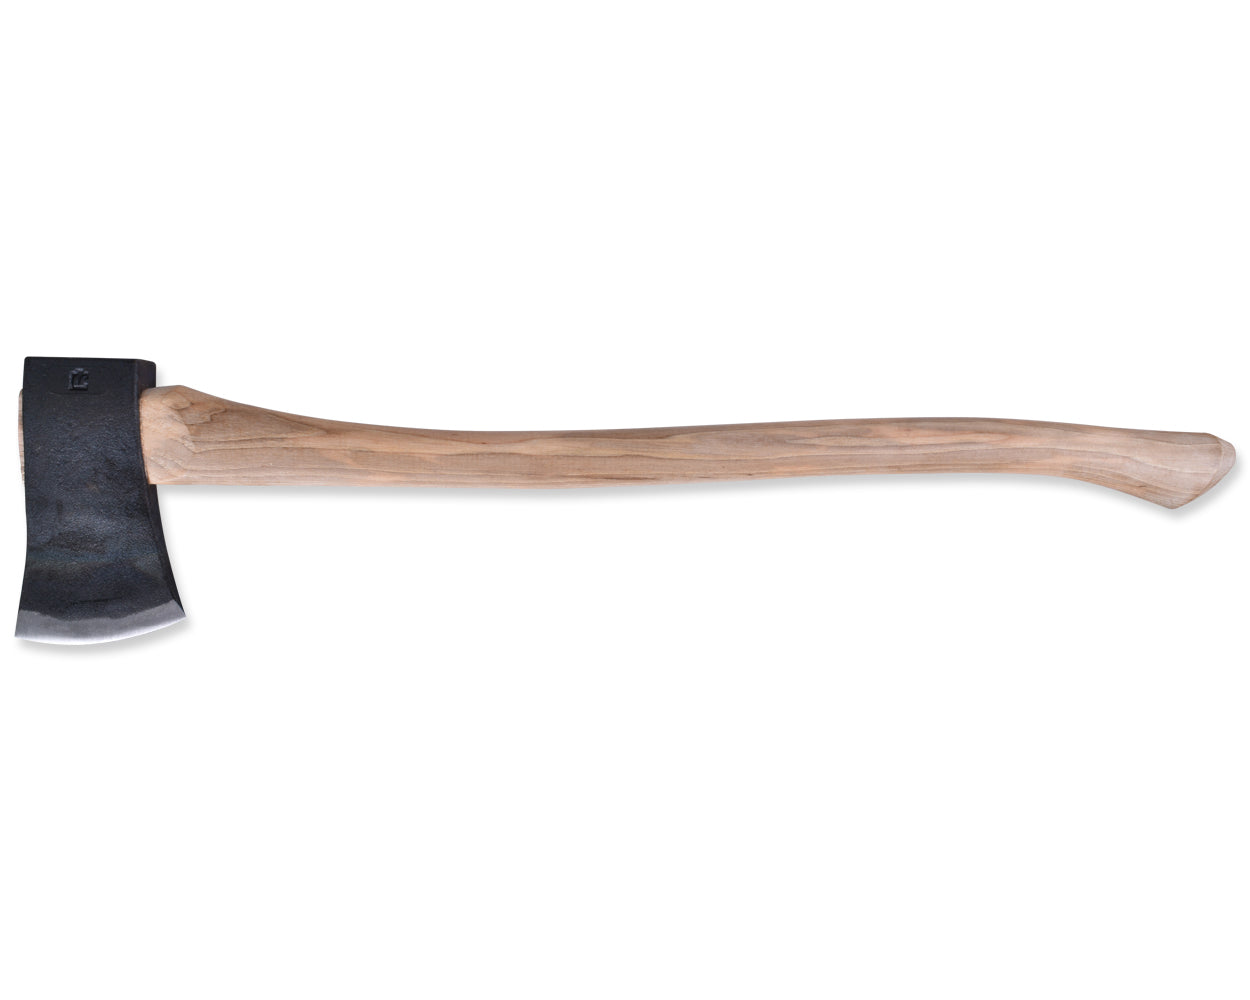 Sport Utility 2.25lb Boy's Axe w/28" Curved Hickory Handle